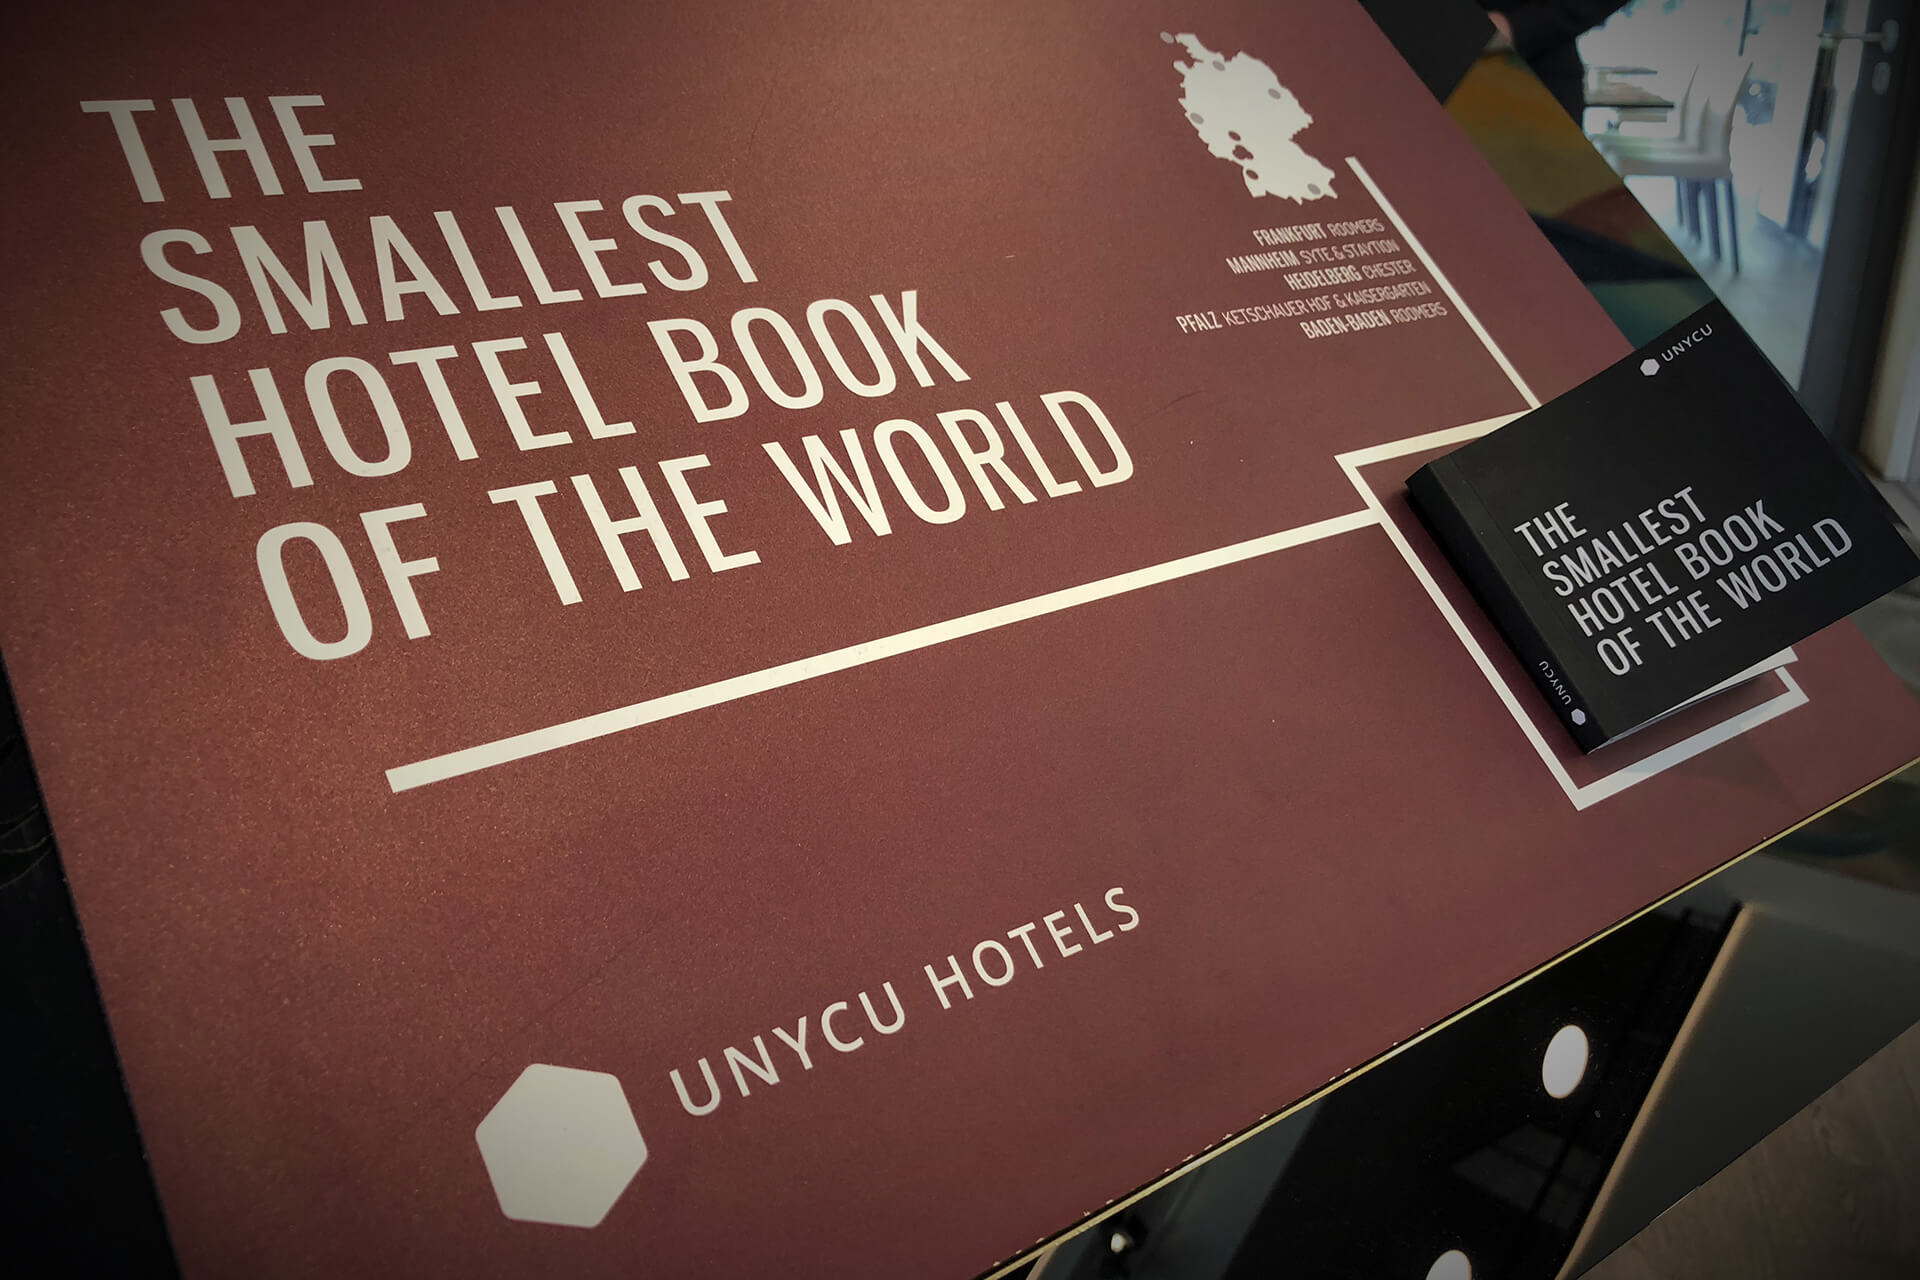 The Smallest Hotelbook of the World - Design Award